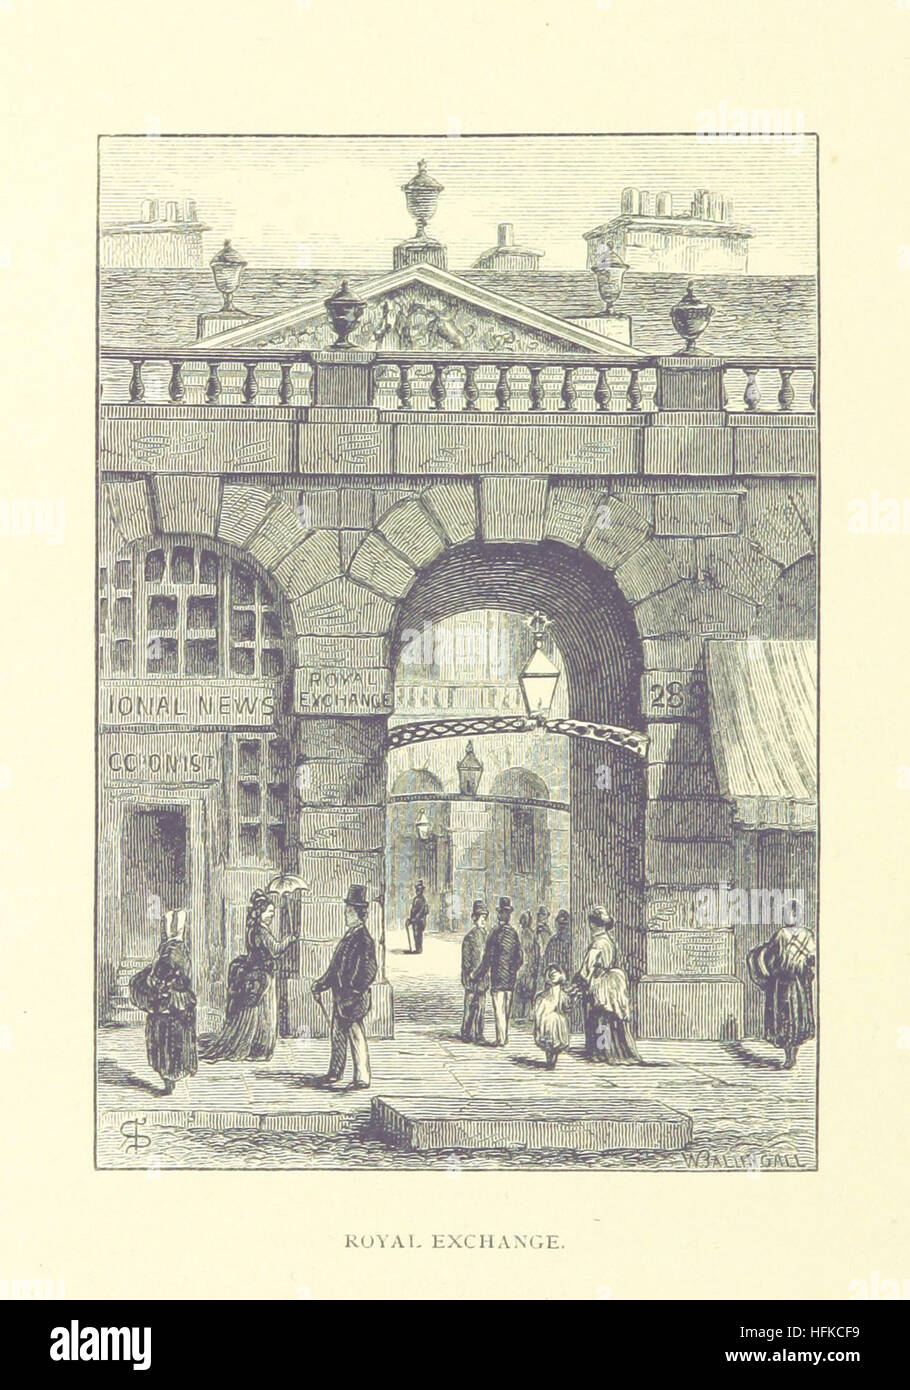 Edinburgh Past and Present, its associations and surroundings. Drawn with pen and pencil. [By various artists. Edited by W. Ballingall.] Image taken from page 120 of 'Edinburgh Past and Present, Stock Photo